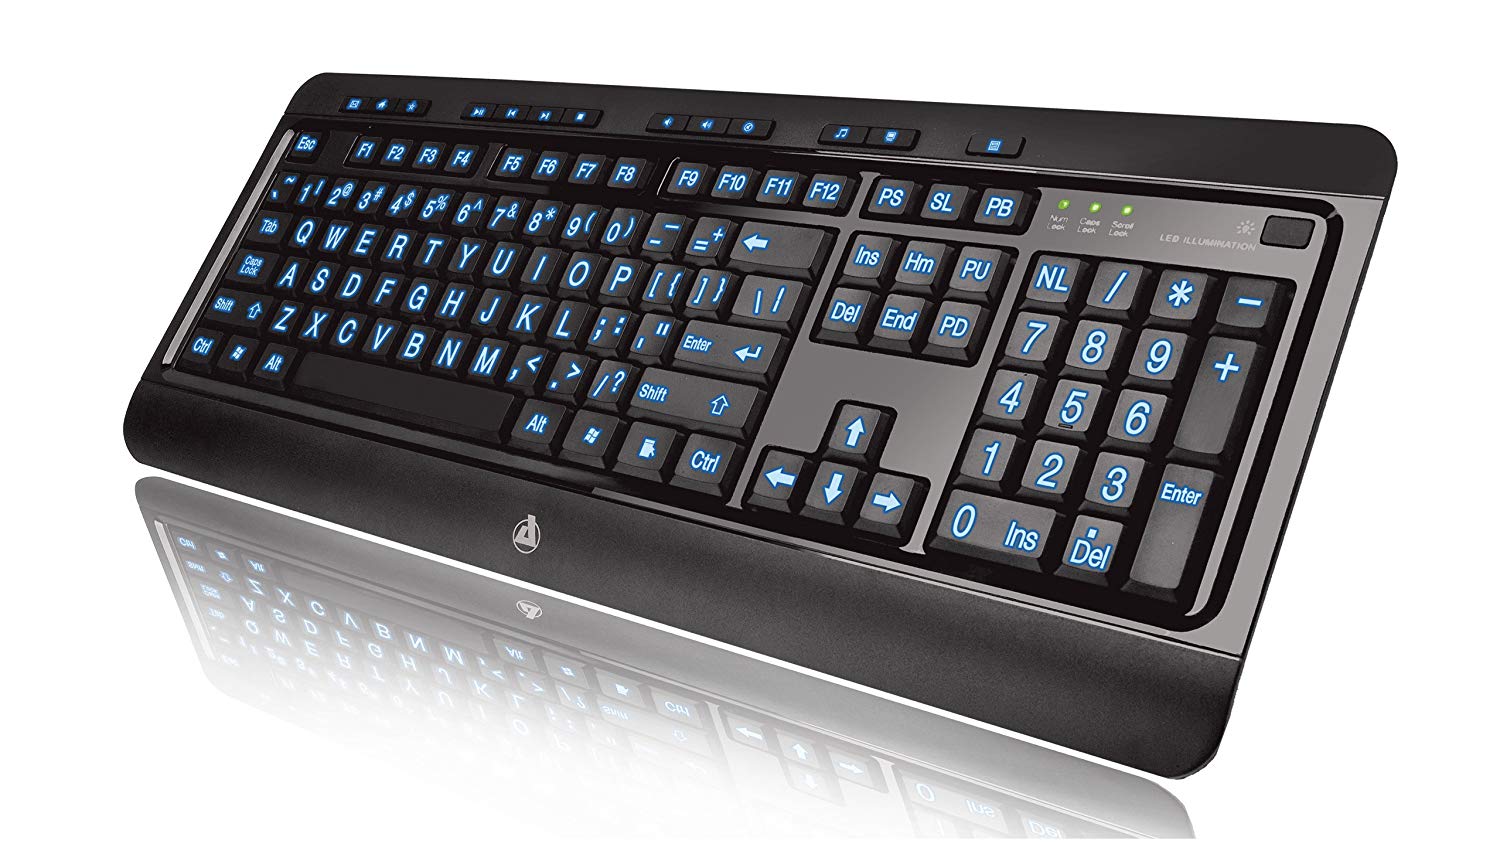 Azio Large Print Tri-Color Backlit Wired Keyboard